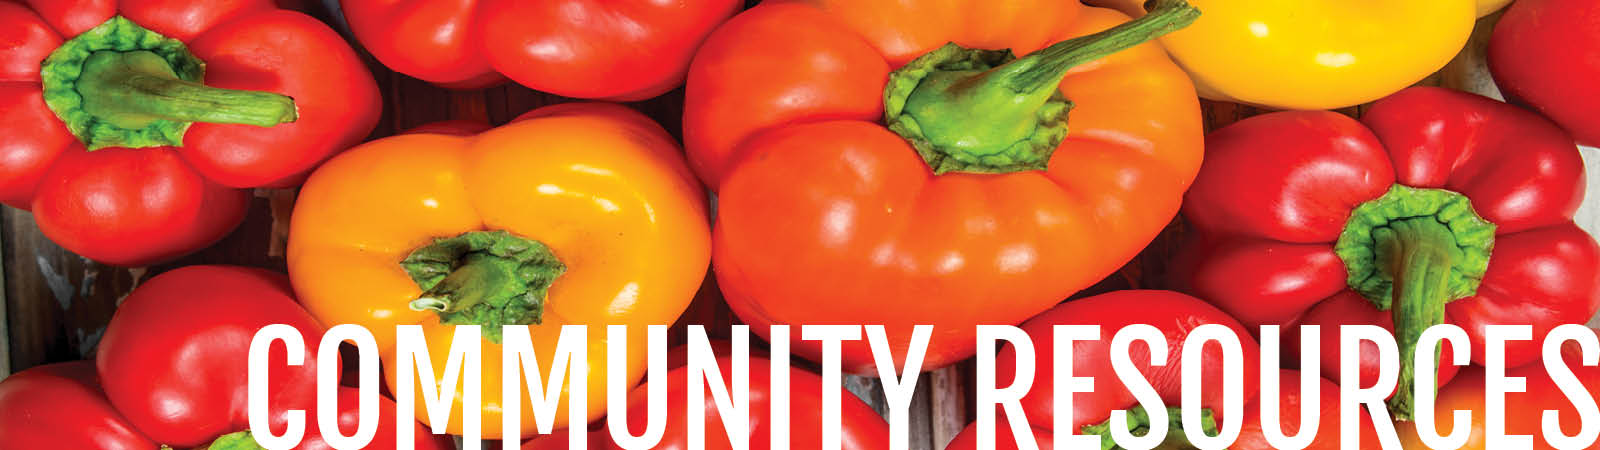 Community Resources header with vibrant bell peppers red, orange, and yellow